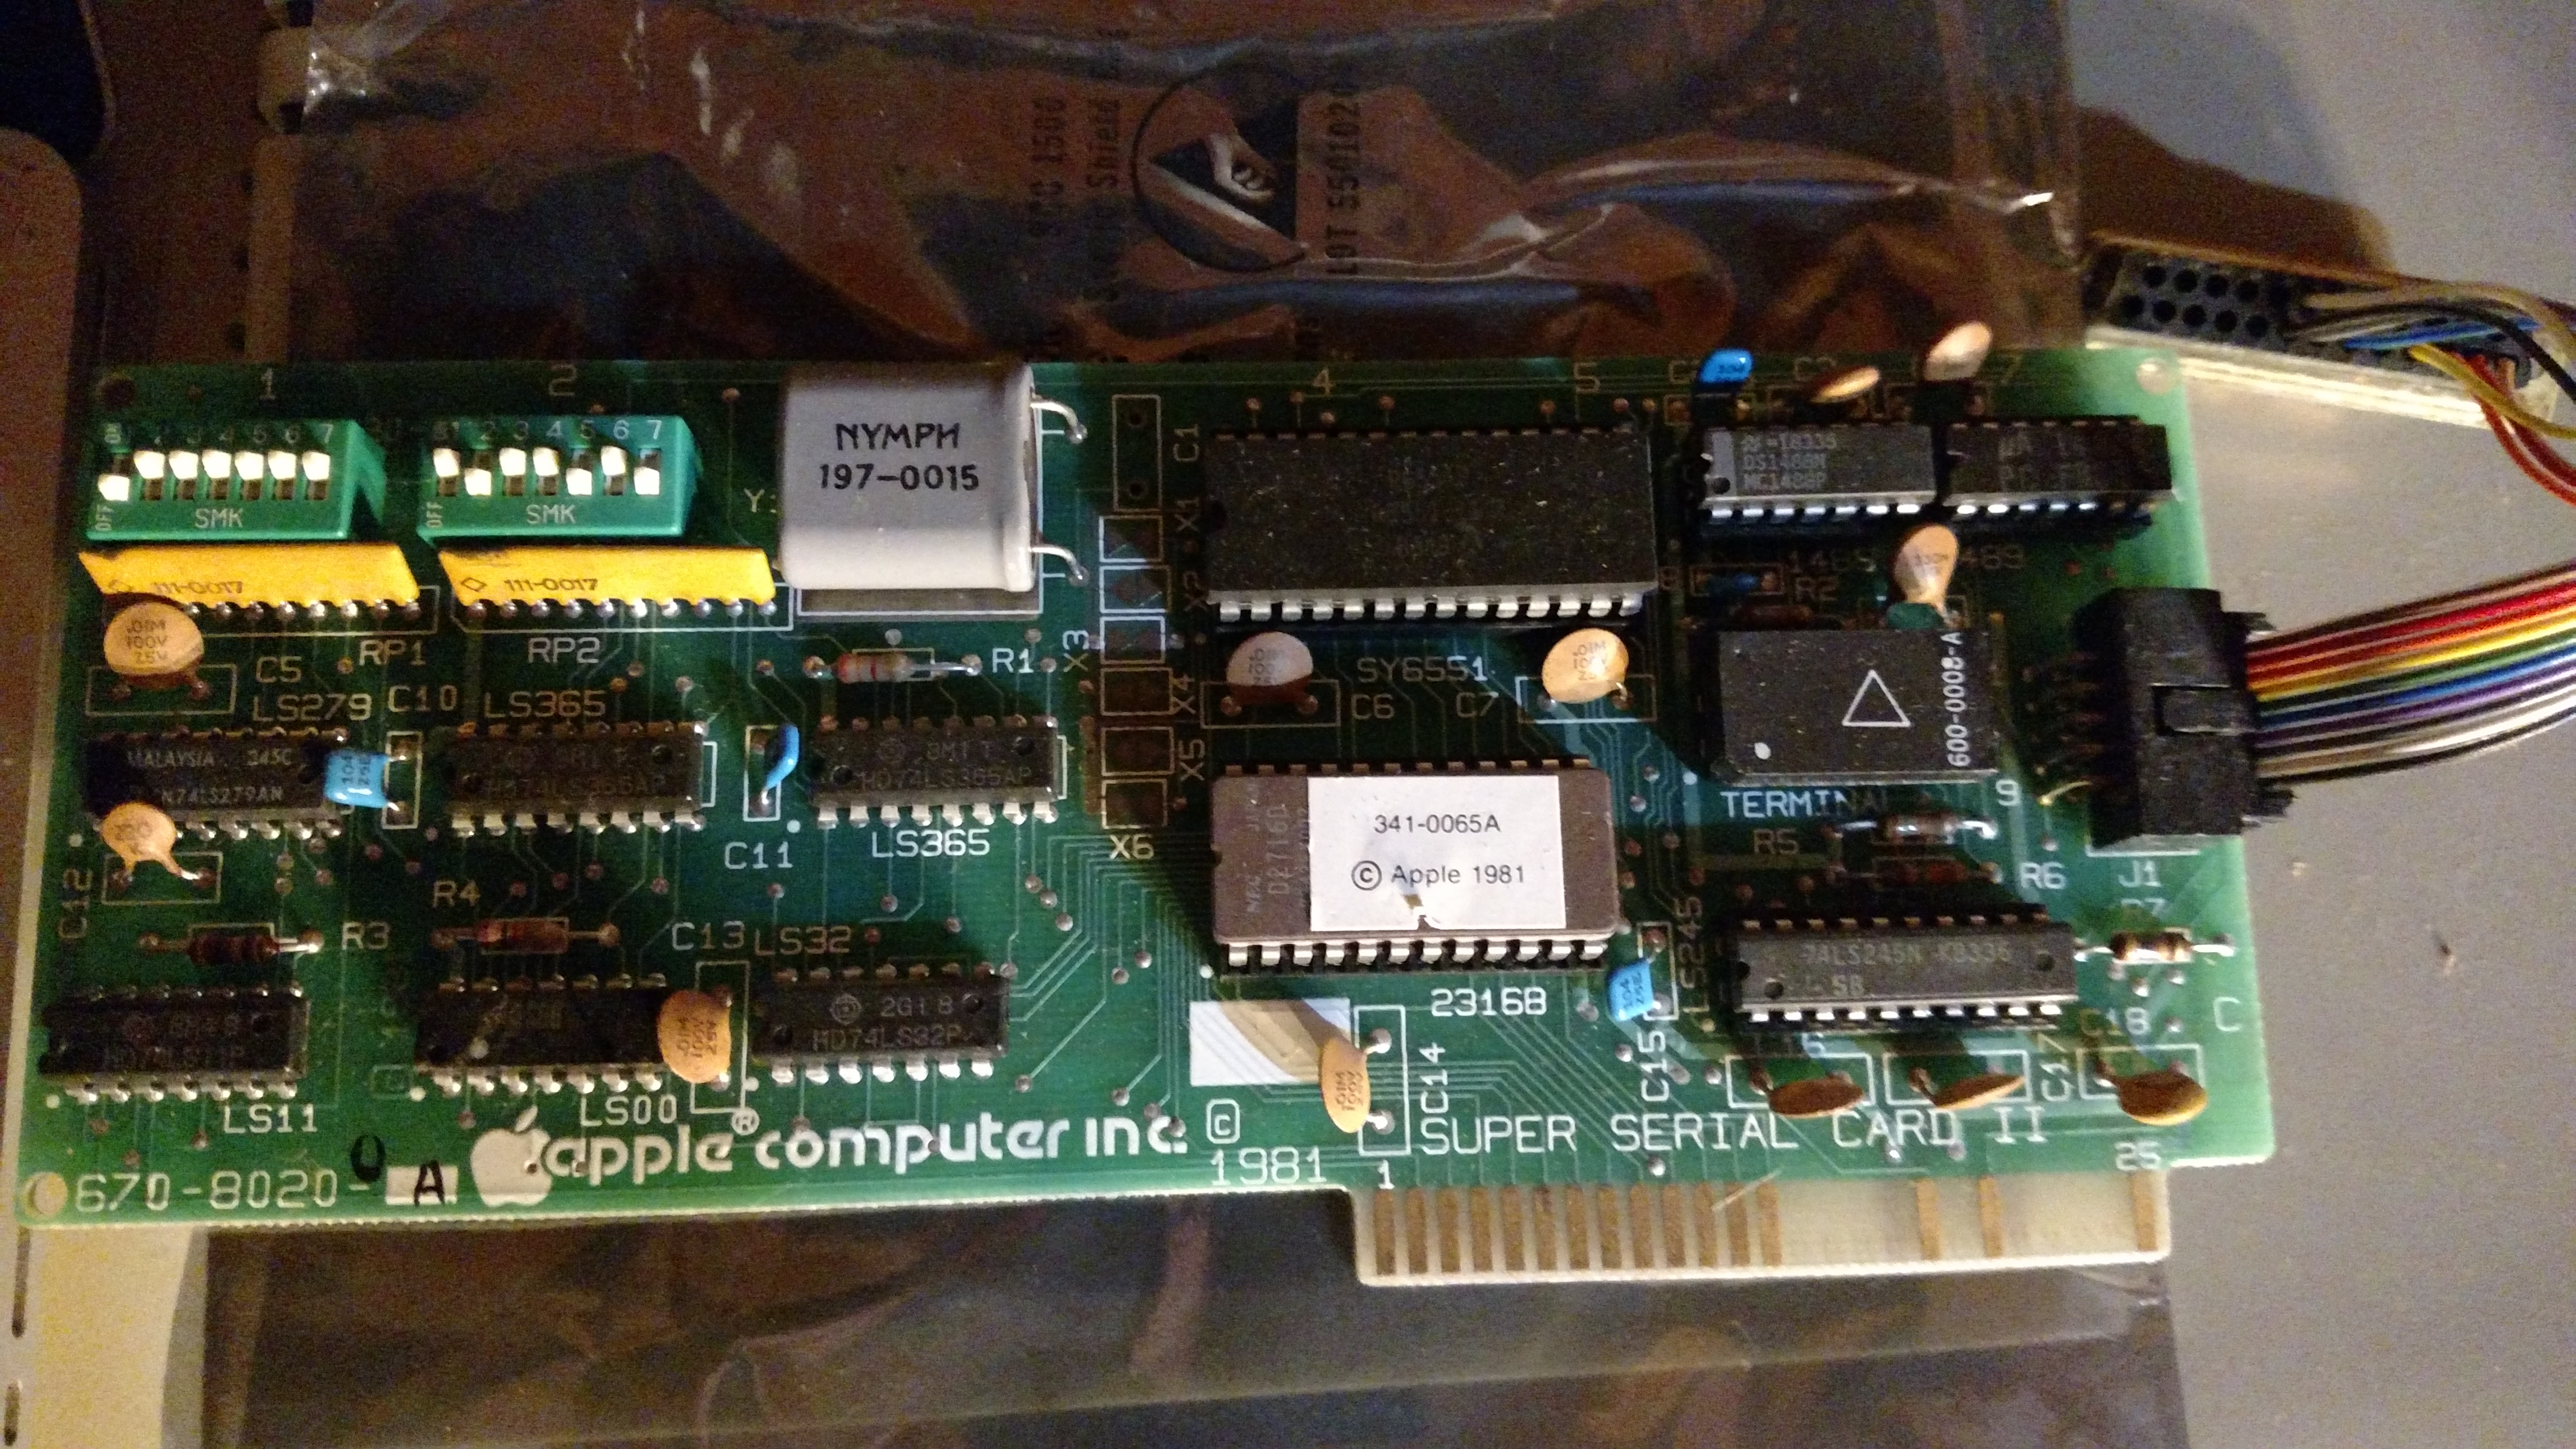 The Super Serial Card, before setting the jumpers